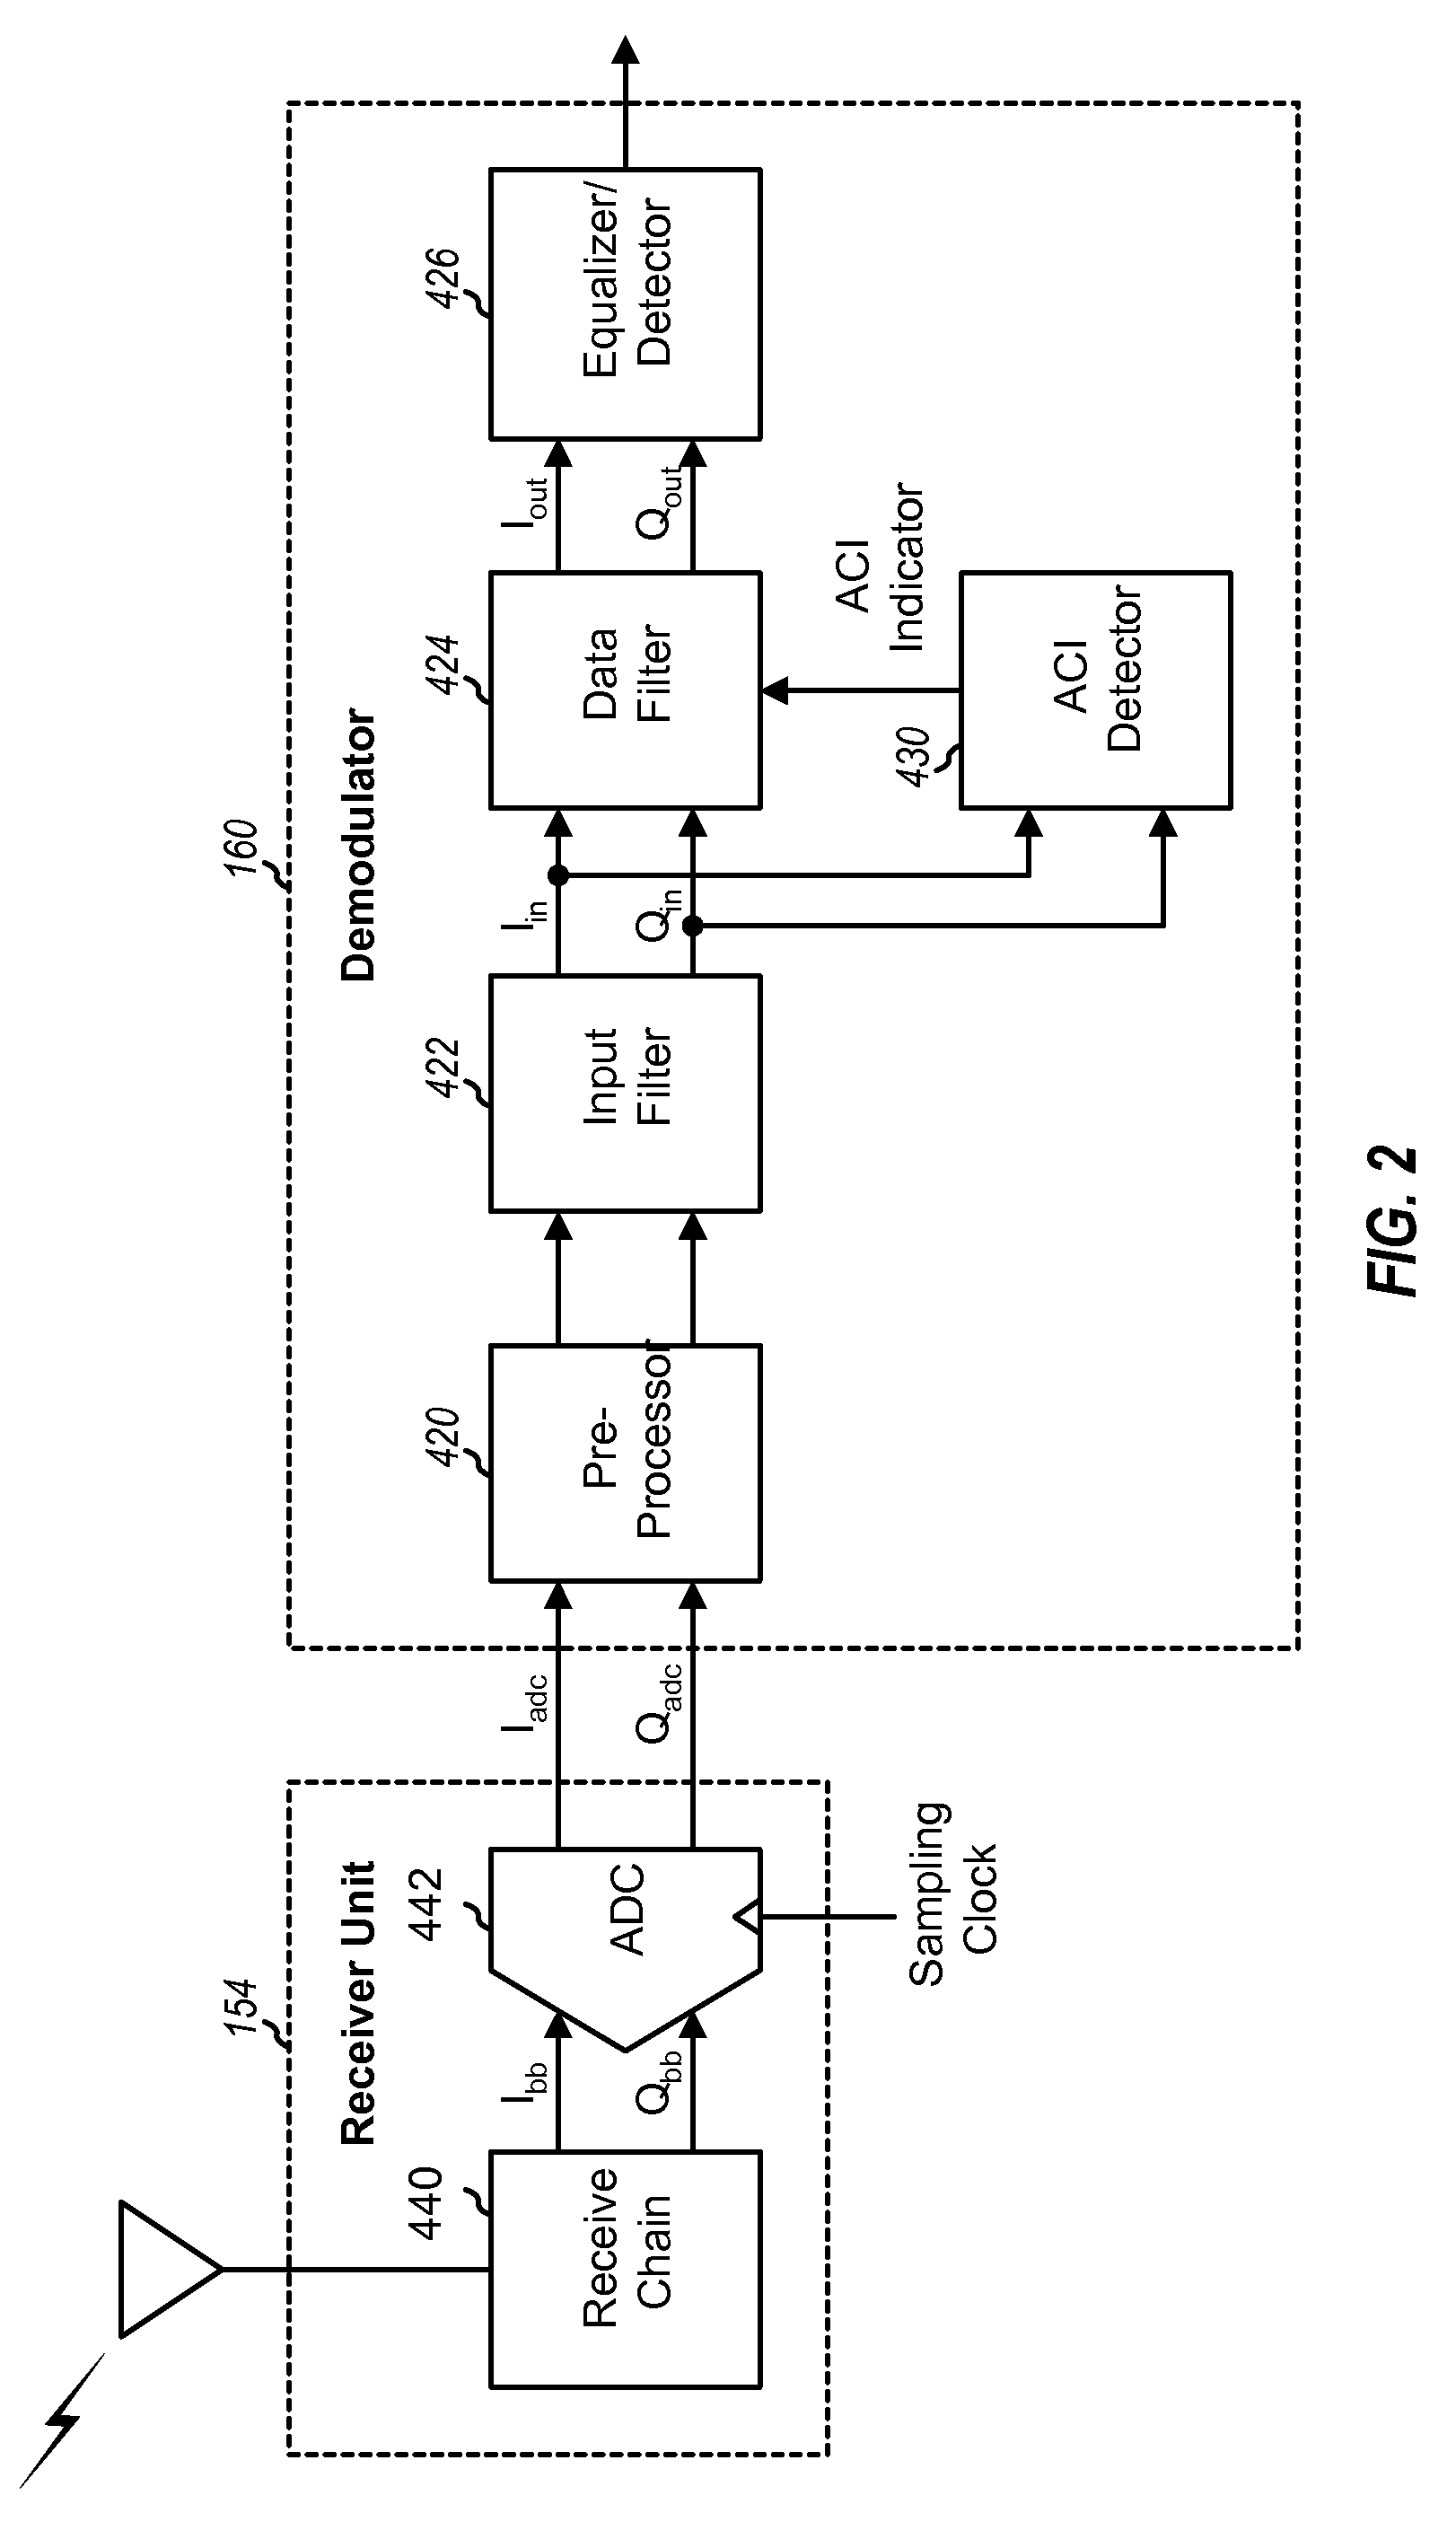 Method and Apparatus For Transmitting a Signal Within a Predetermined Spectral Mask